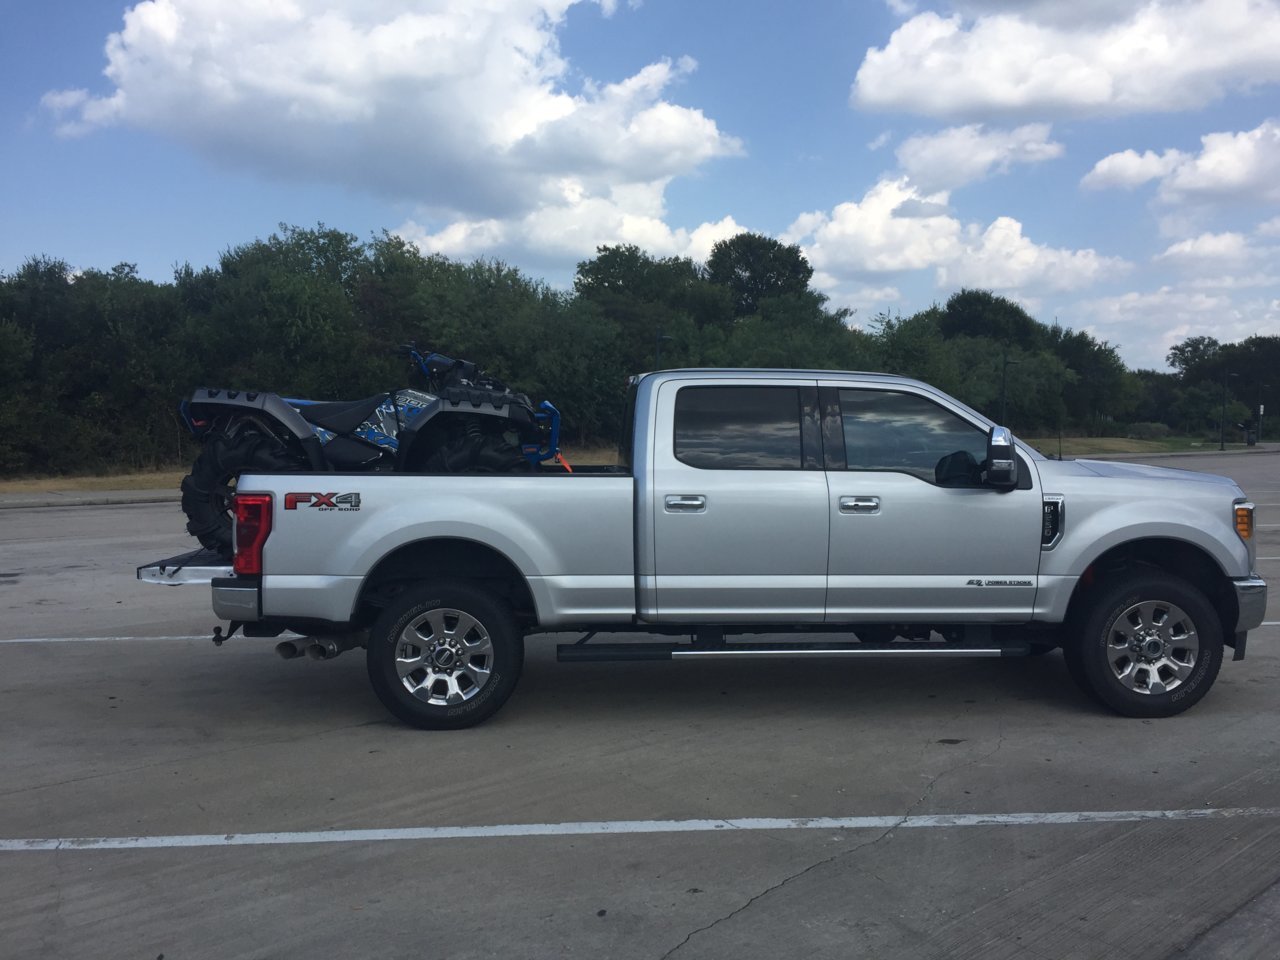 2021 Toyota Limited Tail Gate Loading | Toyota Tundra Forum